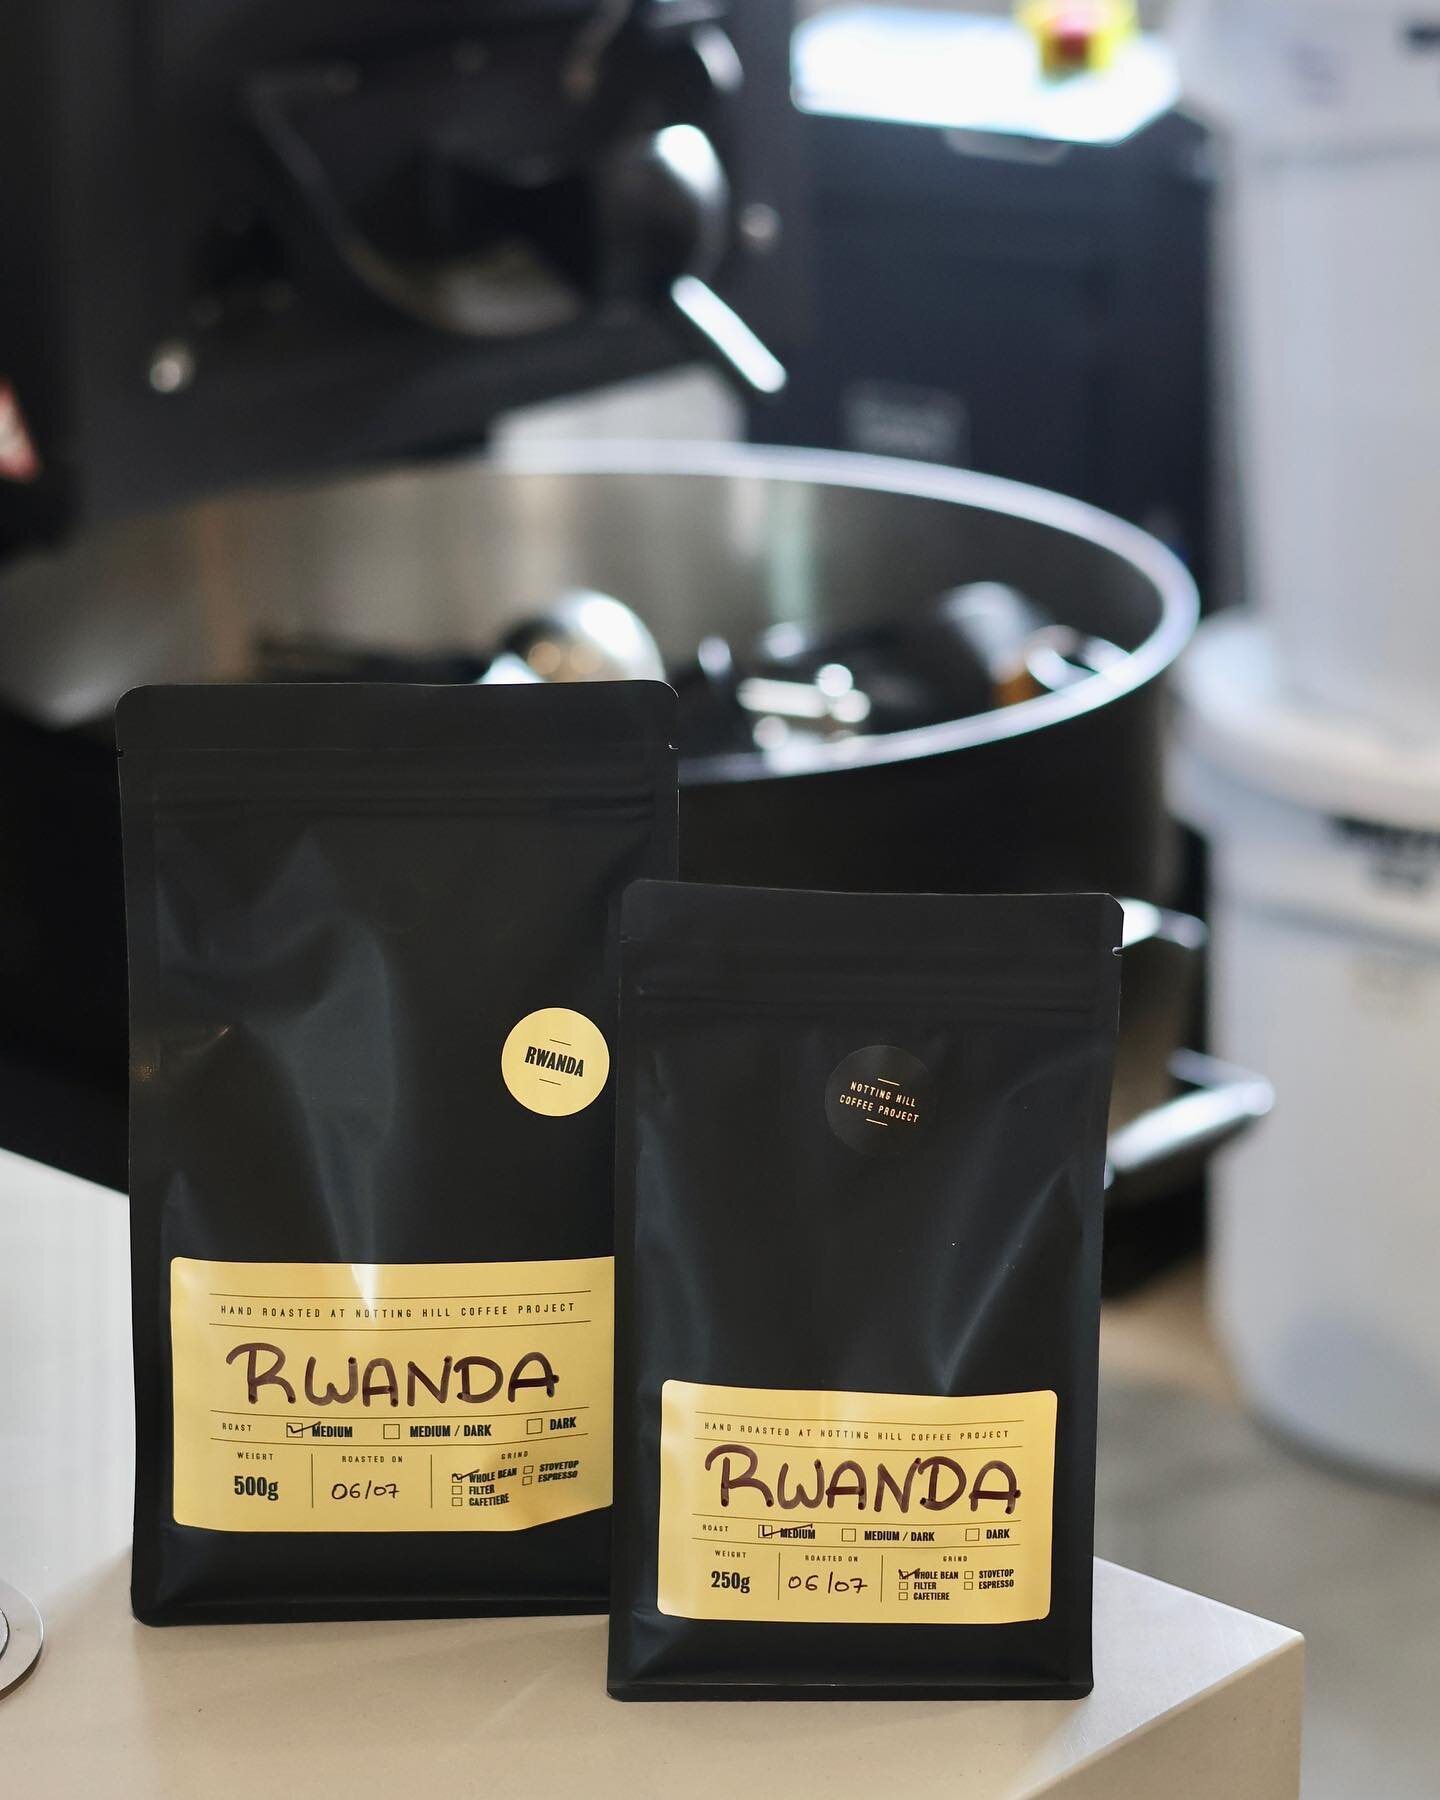 We now have our large bags of RWANDA coffee ready for sale! #NottingHillCoffeeProject